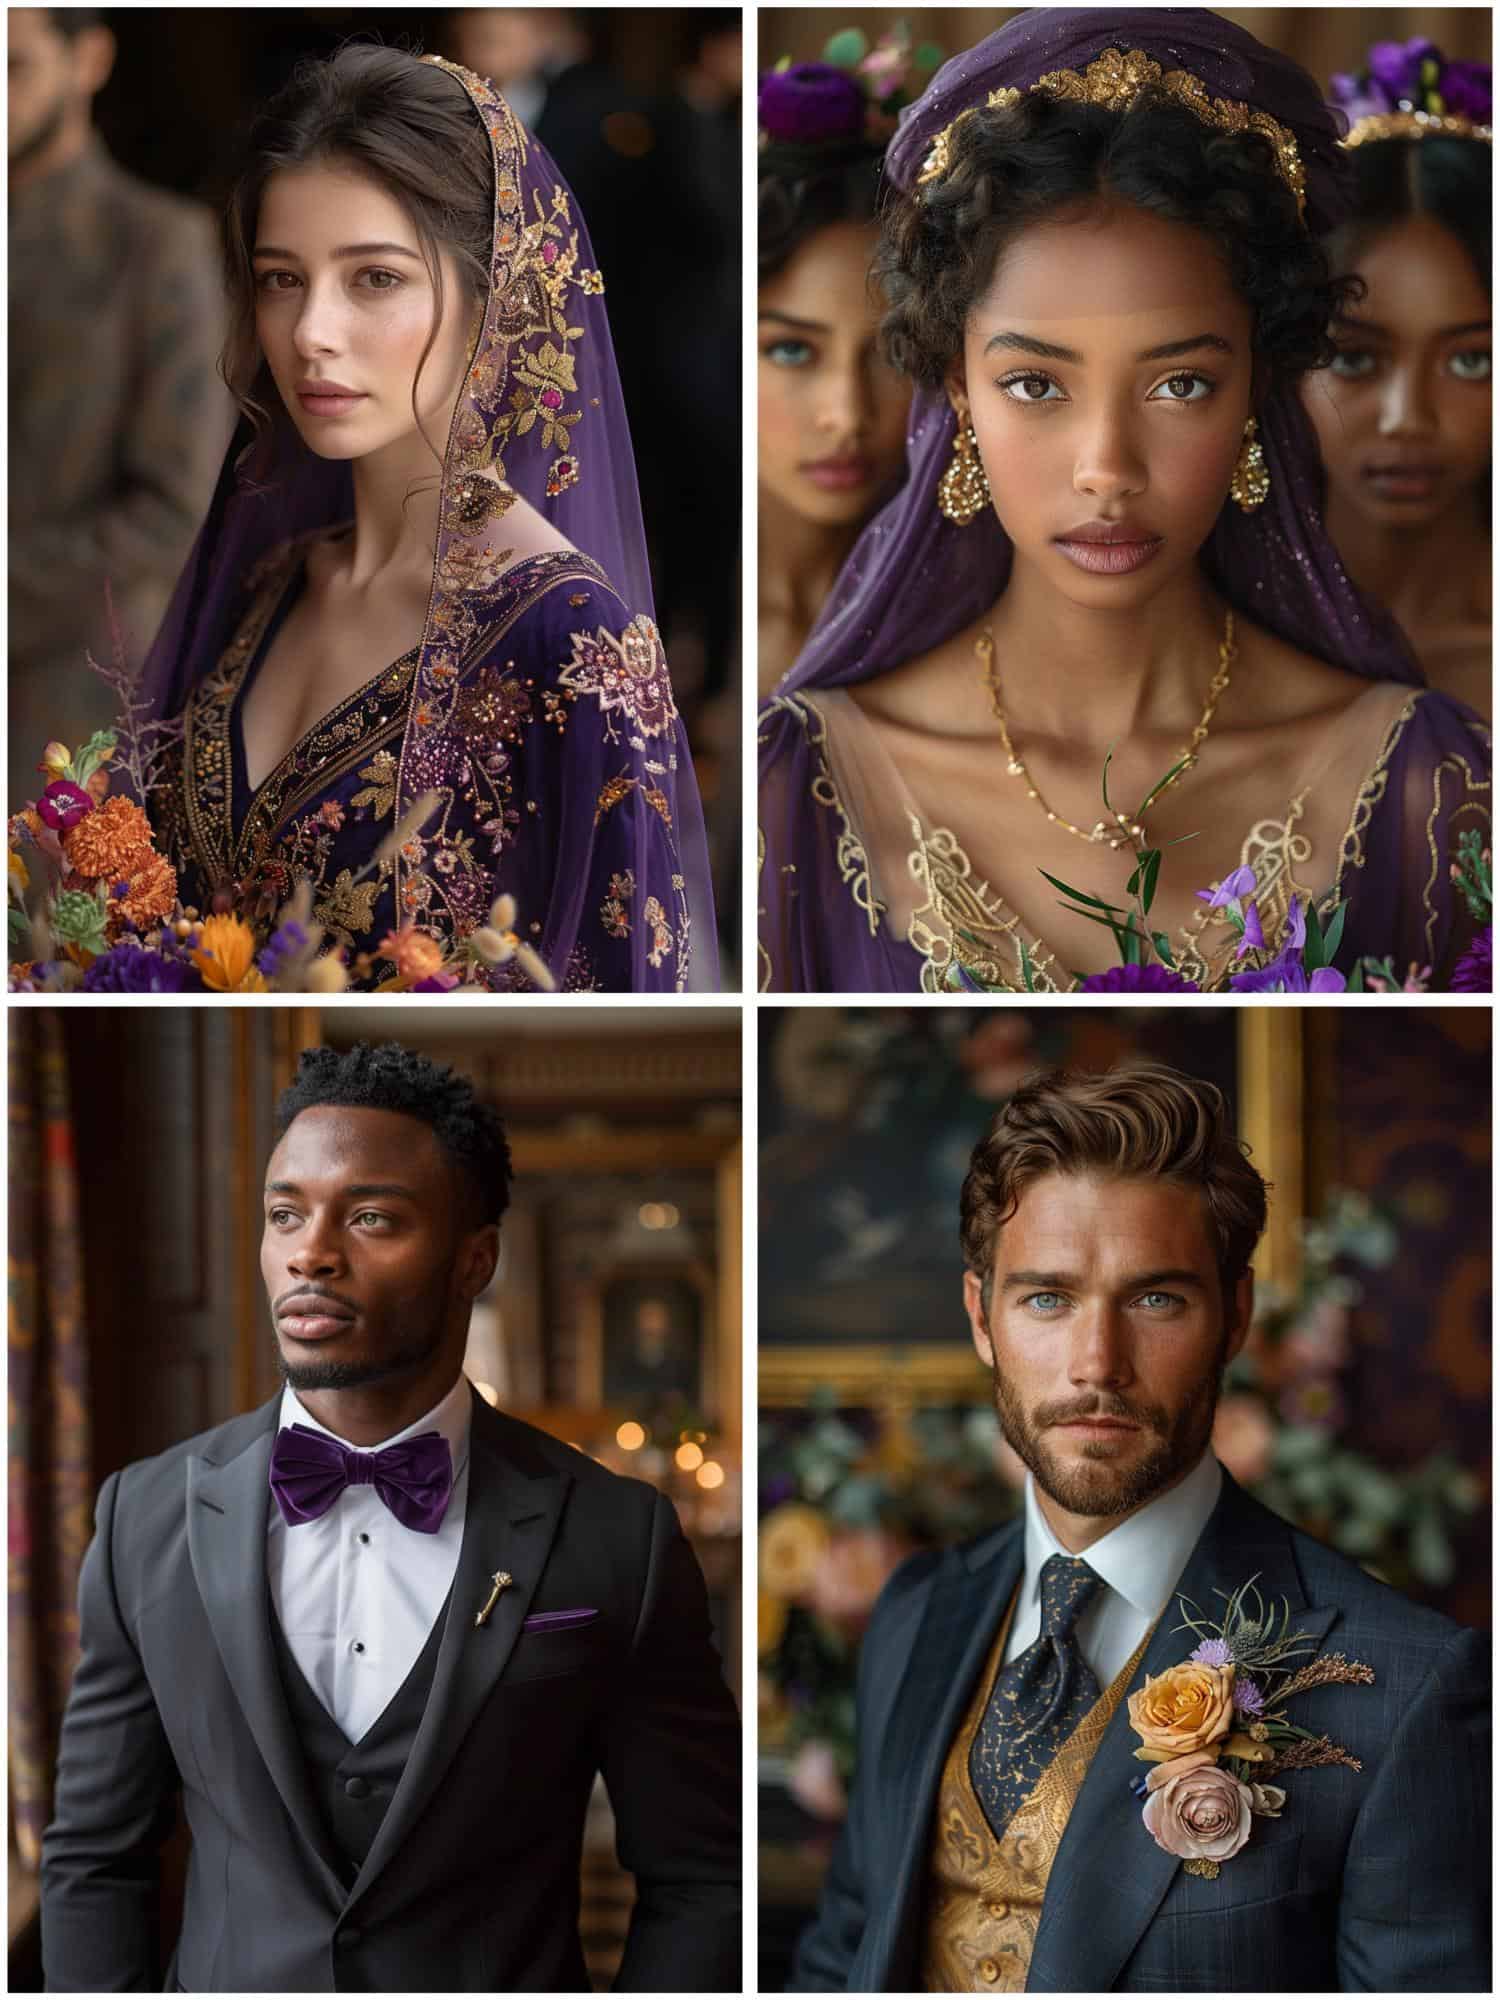 wedding attire in royal purple and gold